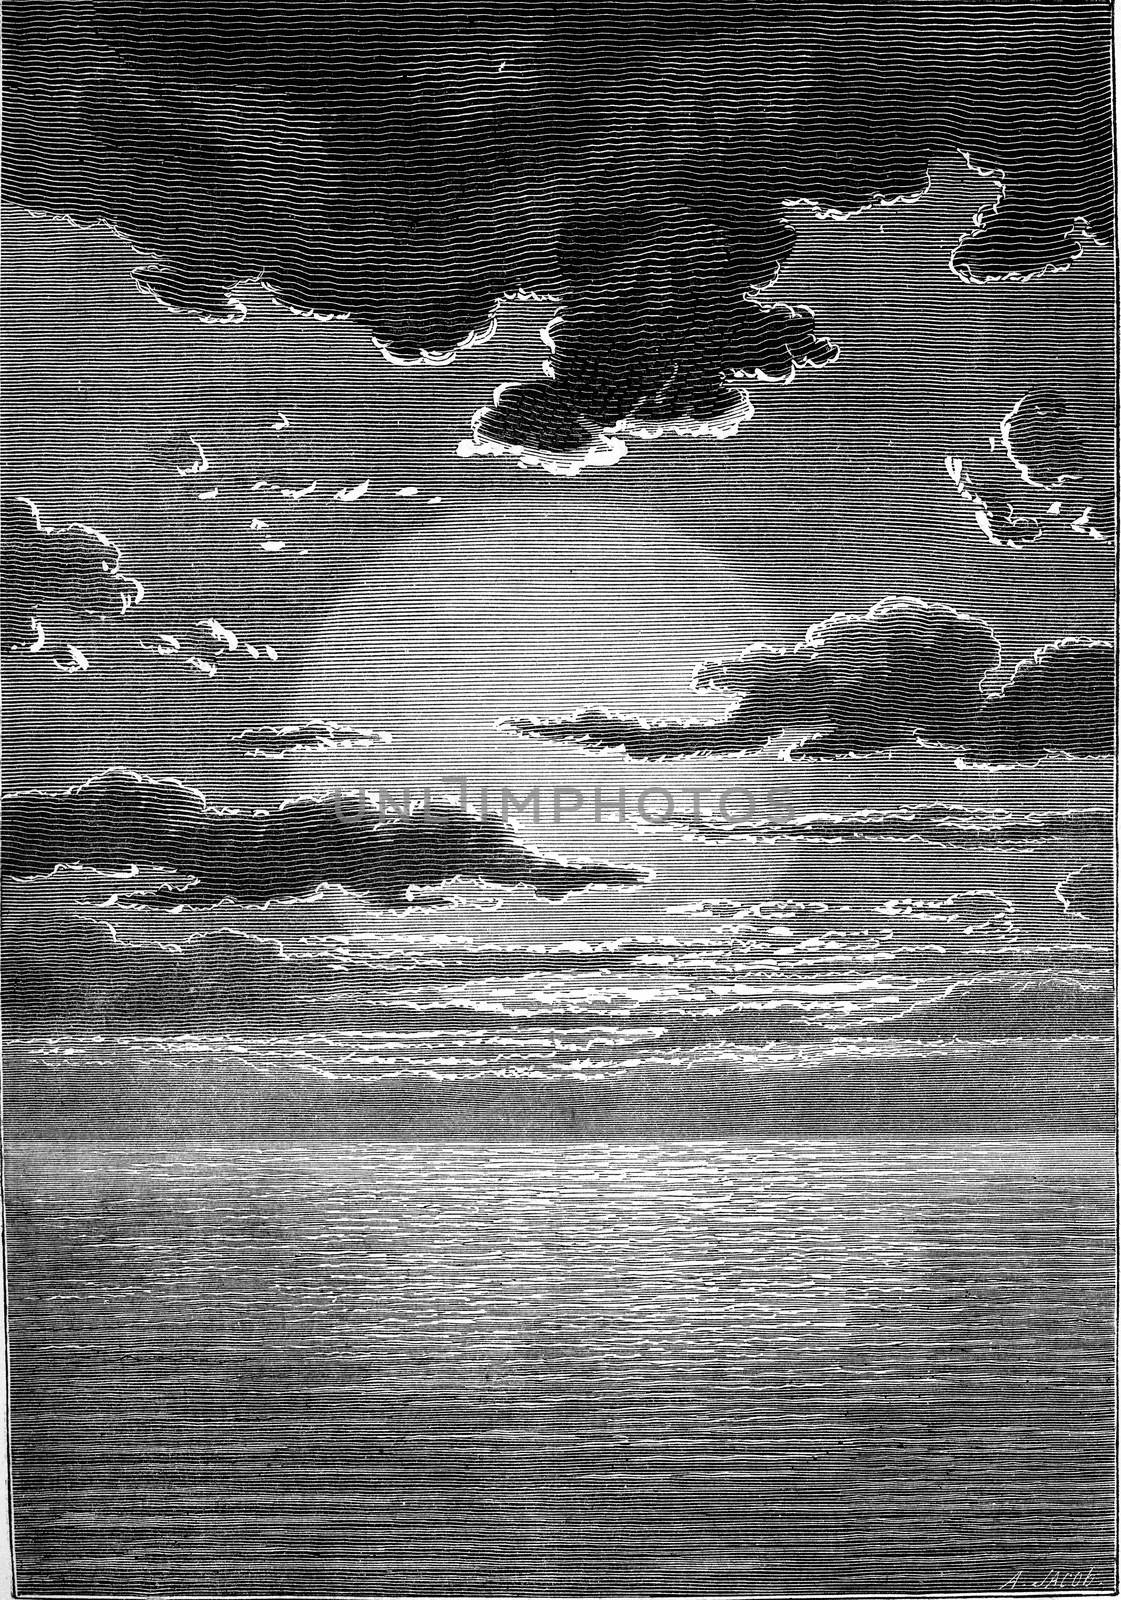 Under the immense age of the first sun, water, water everywhere, water always, vintage engraved illustration. Earth before man – 1886.
